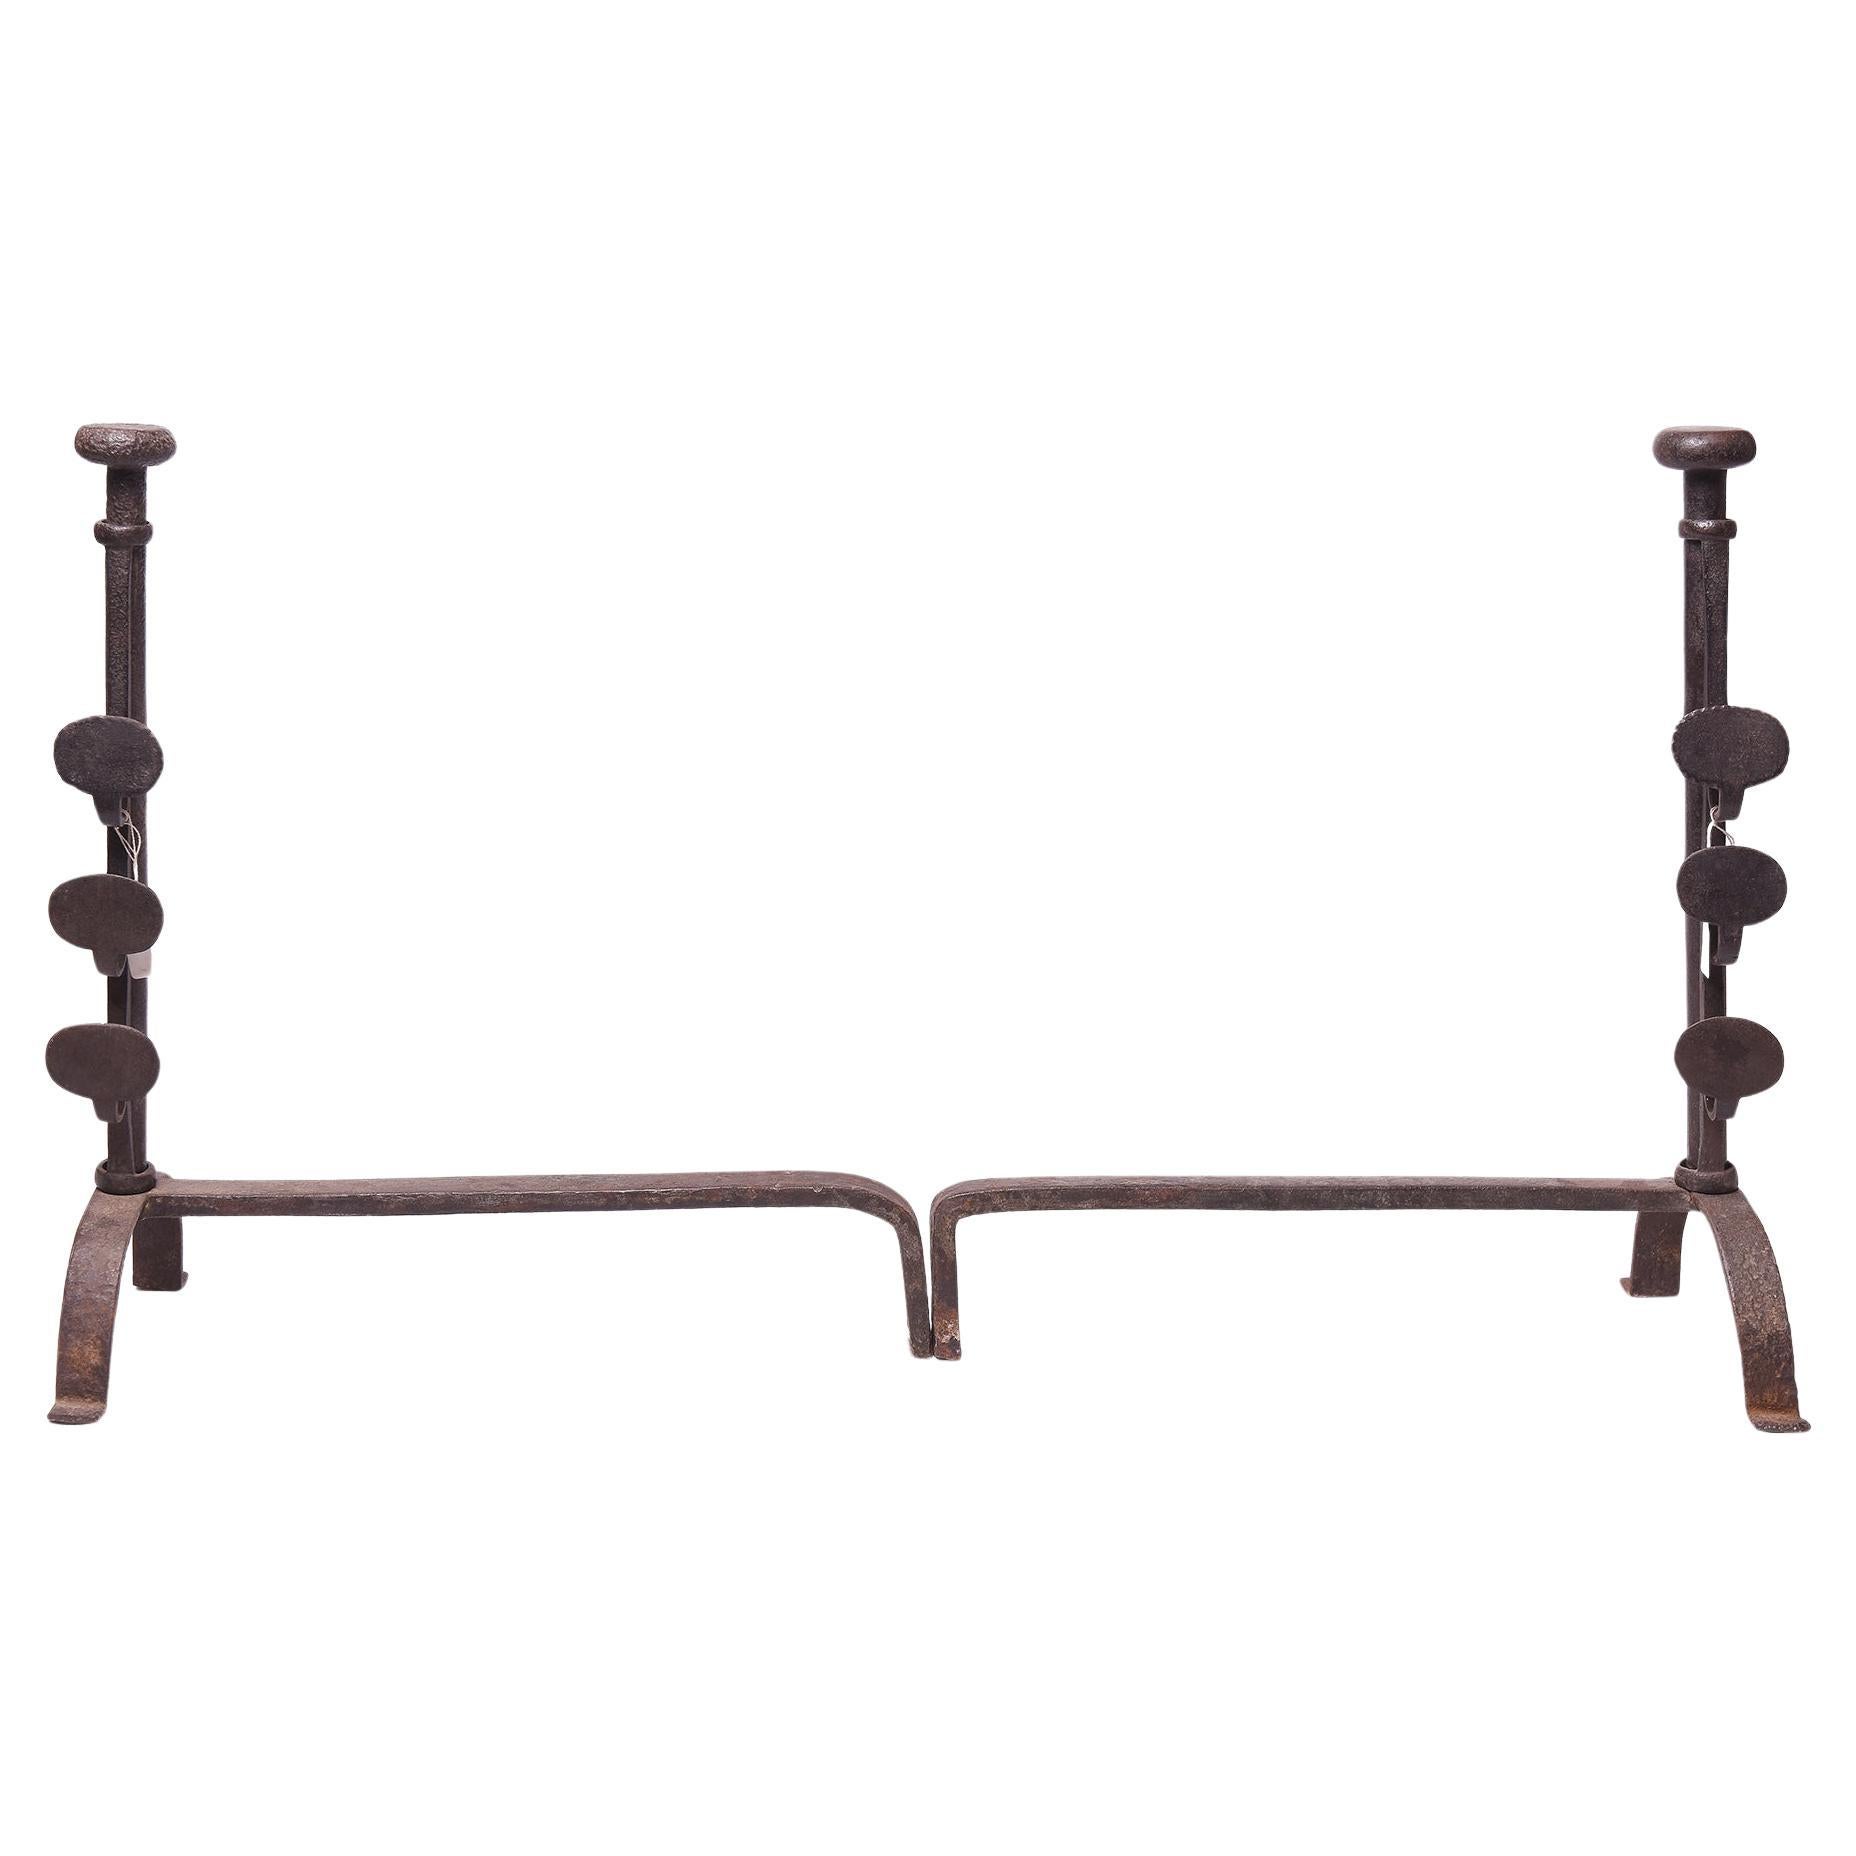 Other Antique Iron Andirons For Sale